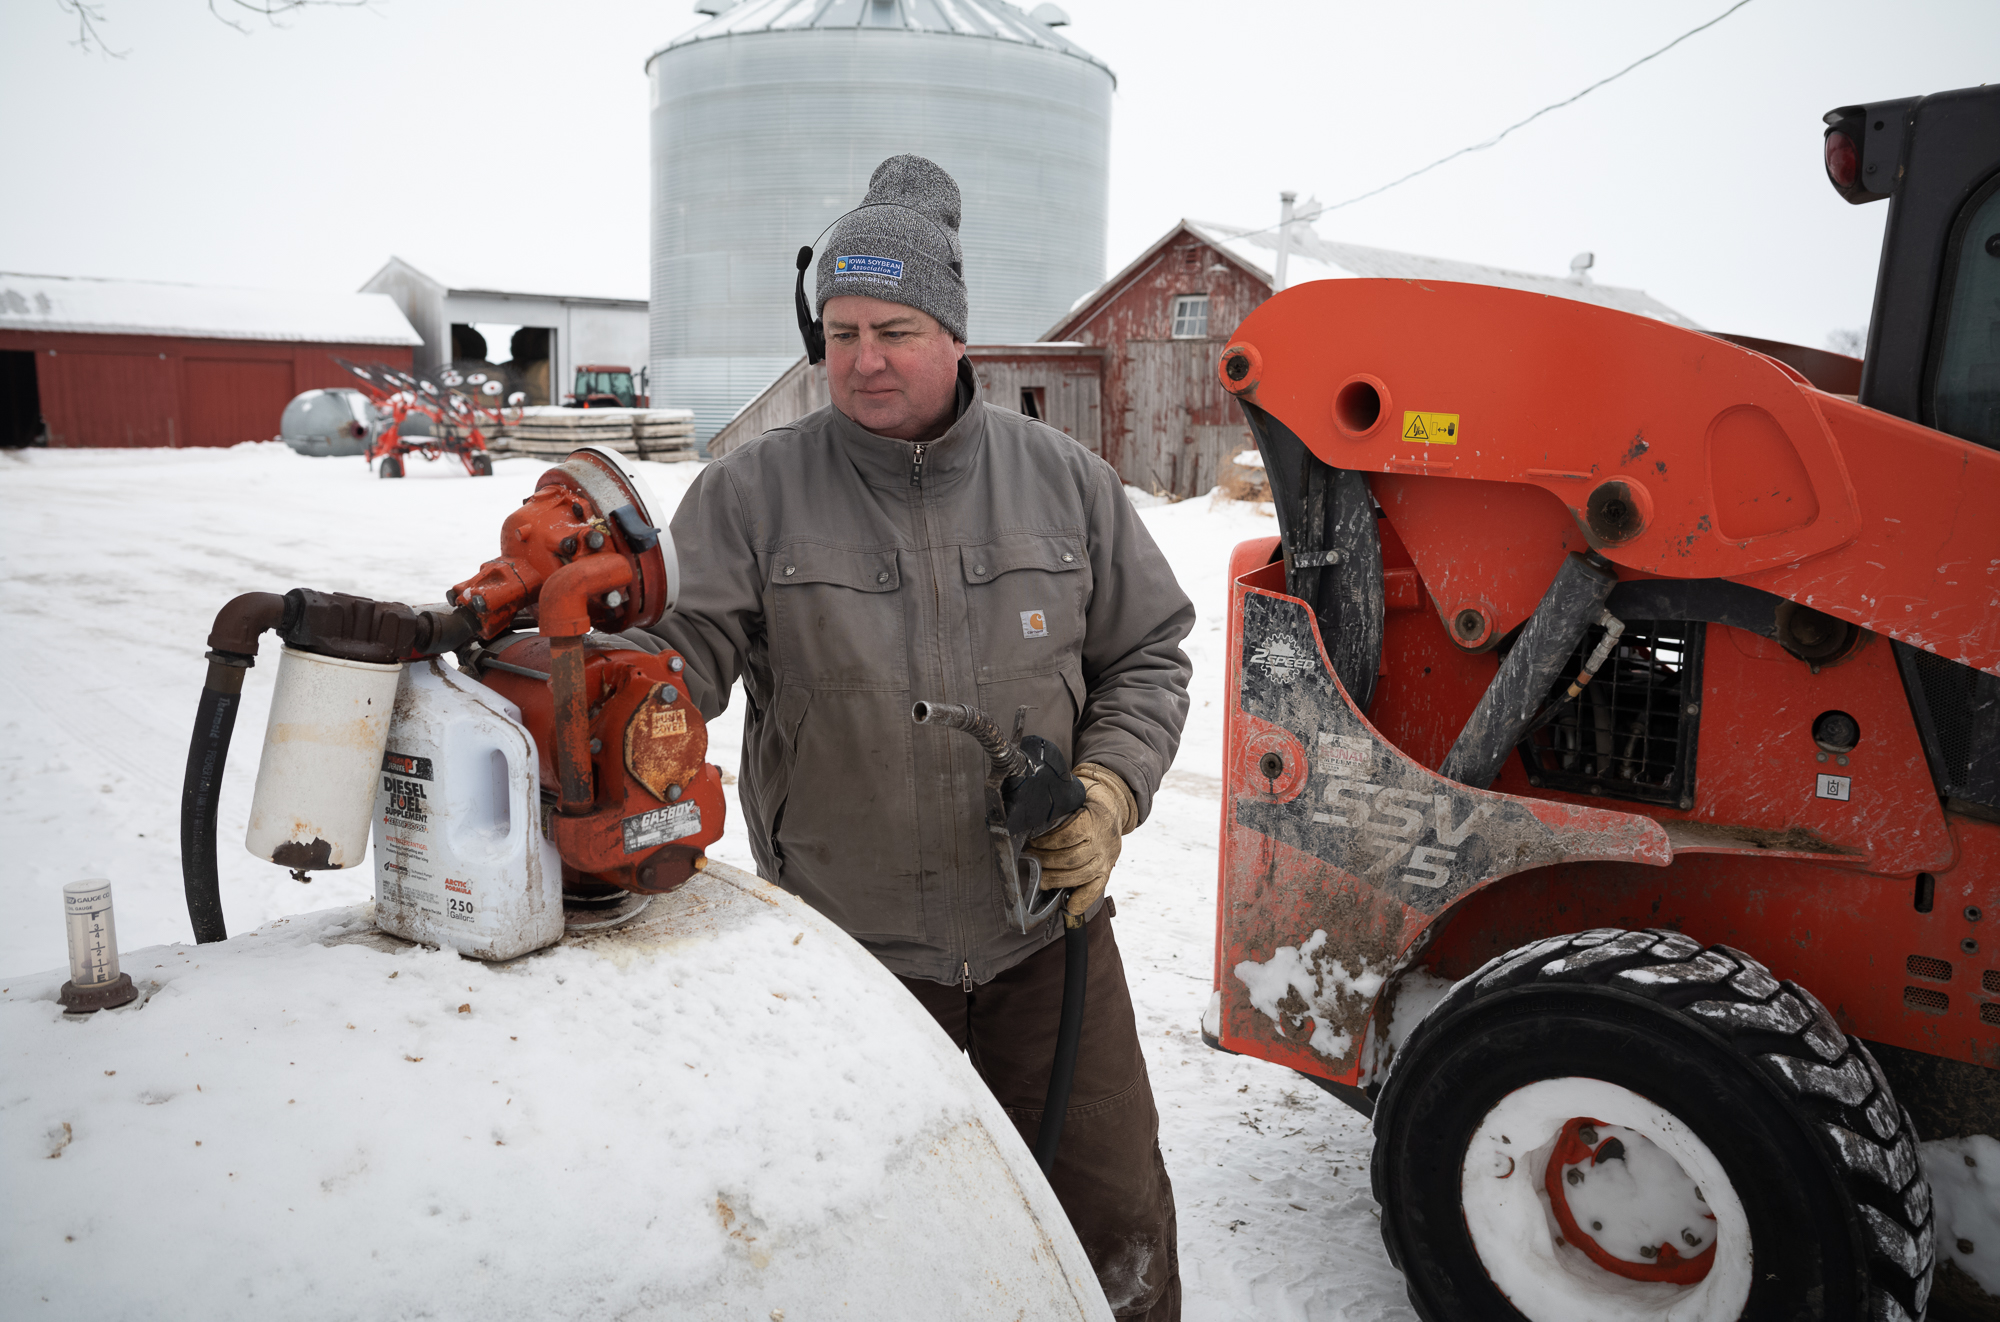 Dave Walton fills up with biodiesel on his farm.